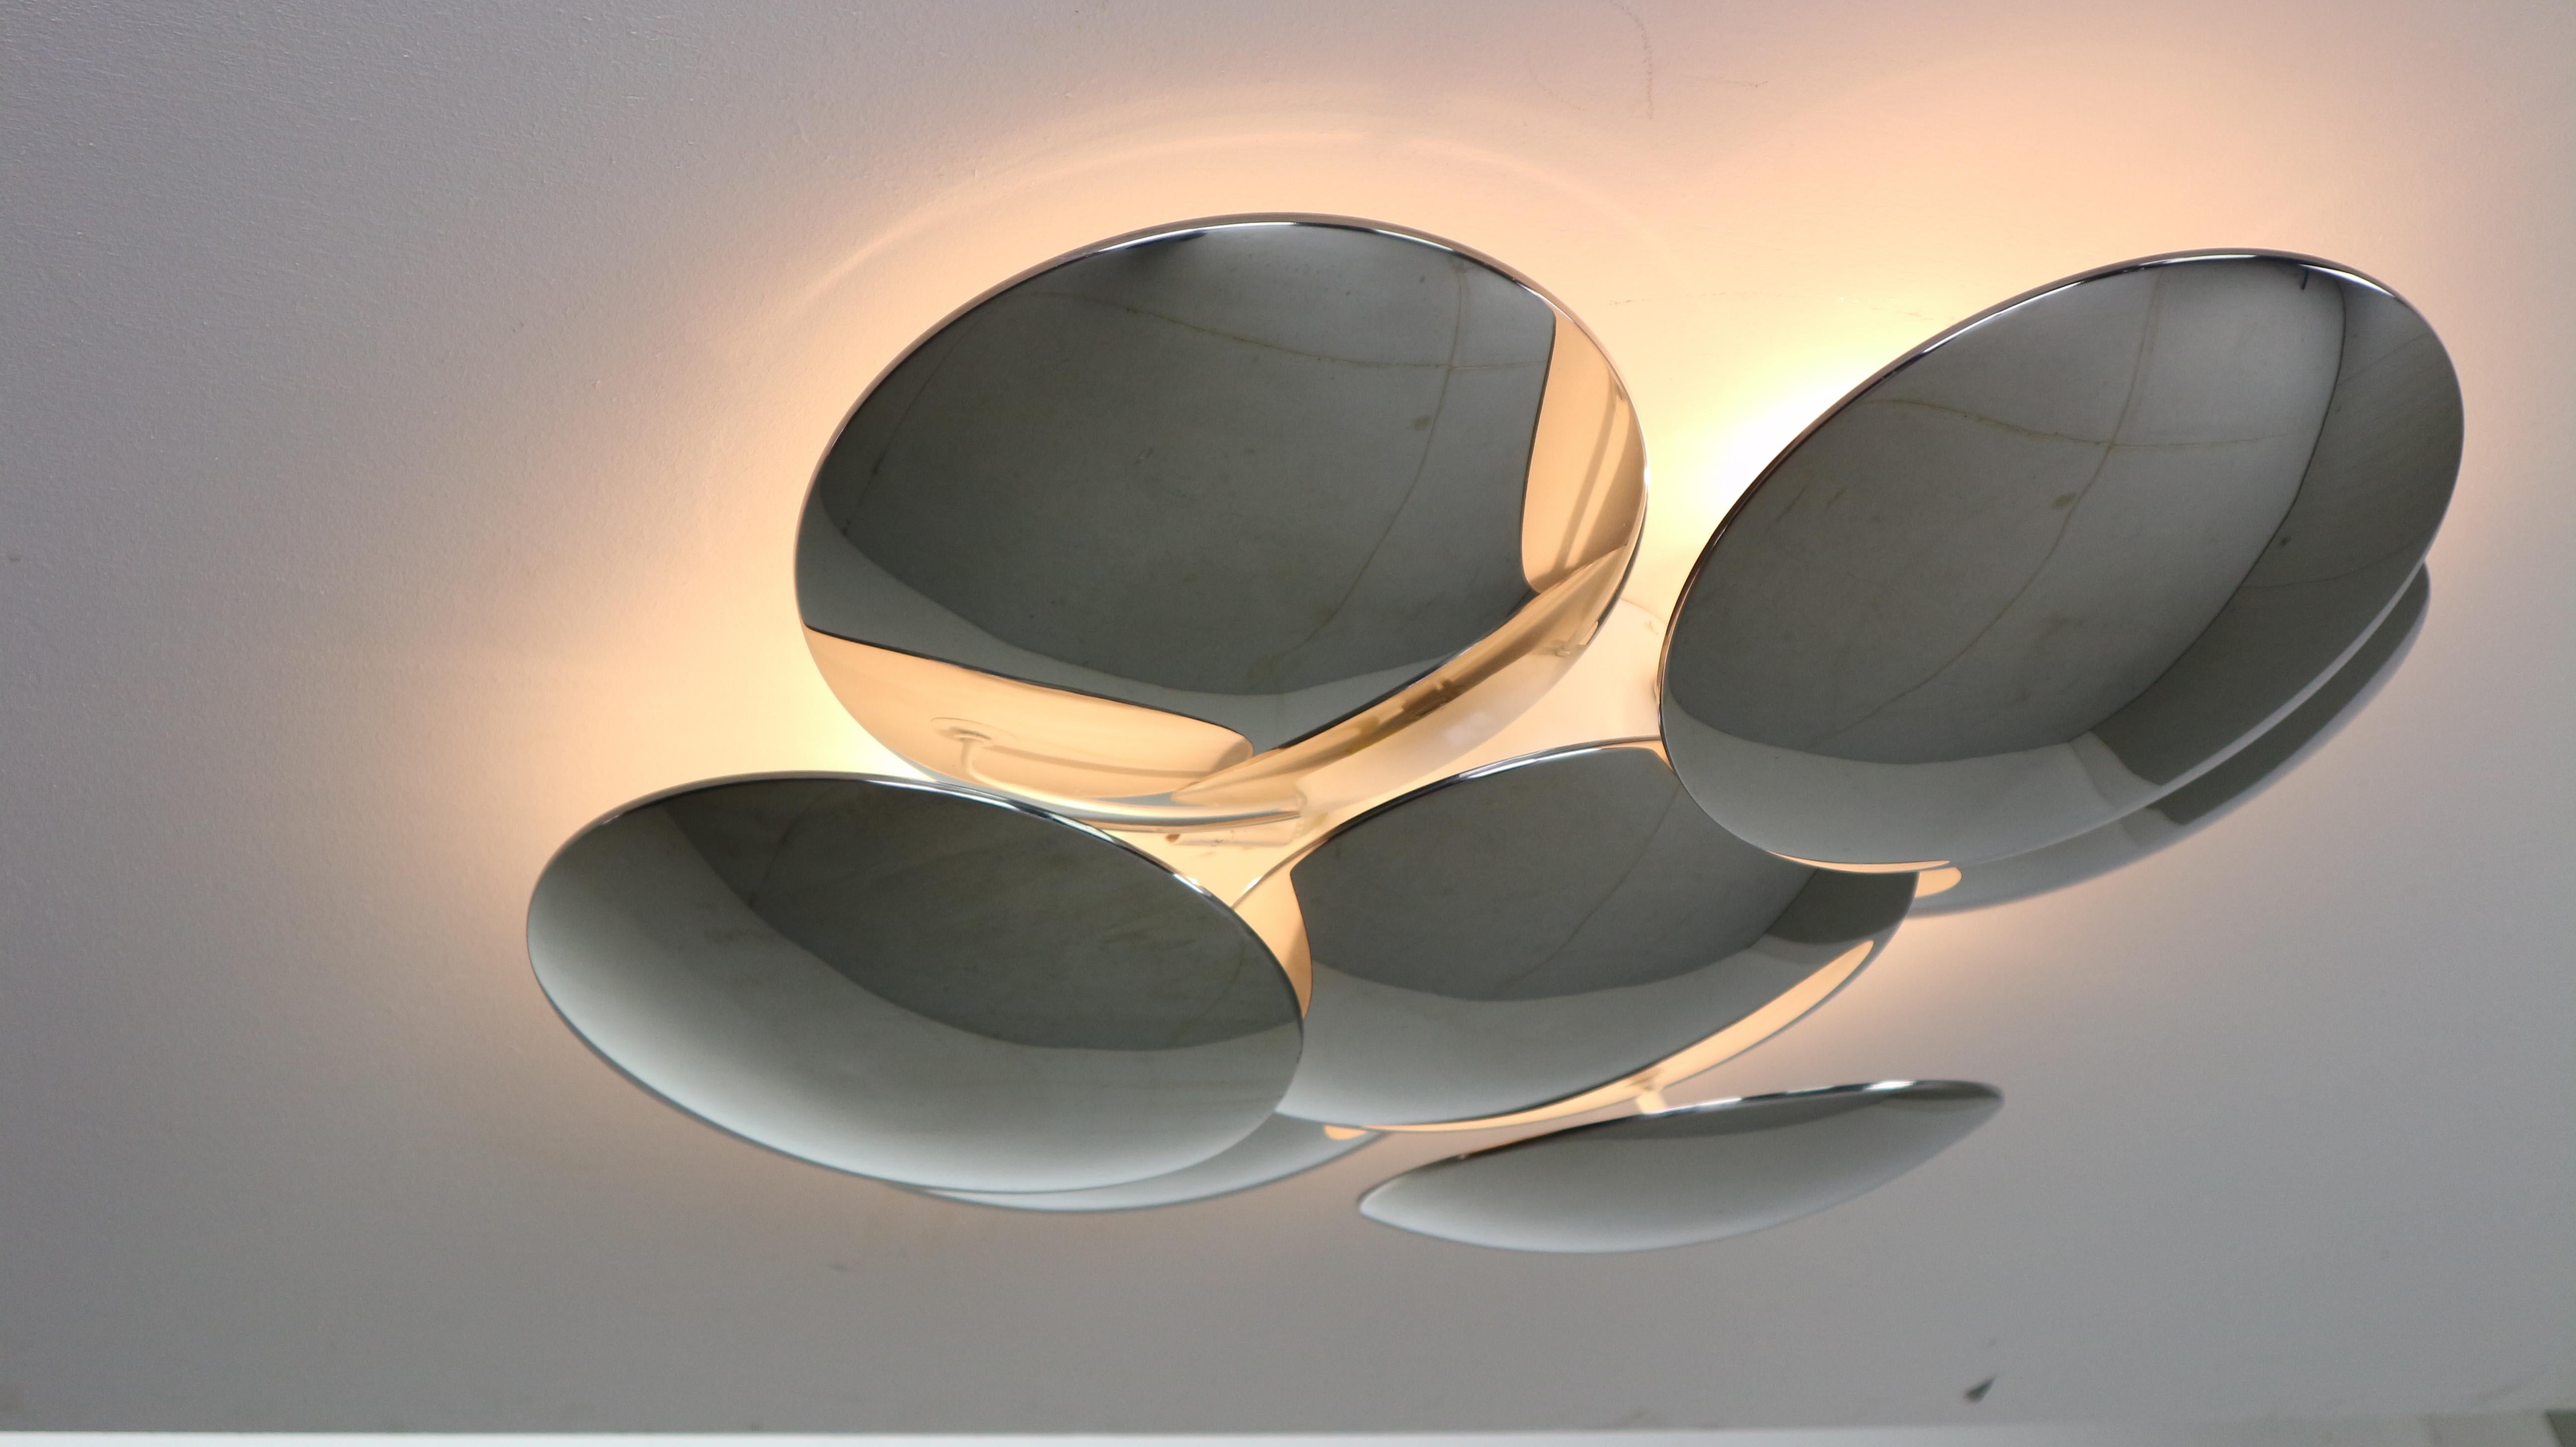 Mid-Century Modern period light fixture by Reggiani that can be either ceiling or wall mounted, made in 1970s period, Italy.
Composed of seven overlapping convex chrome disks that hide the white lacquered frame beneath. Holds three E26 sockets.